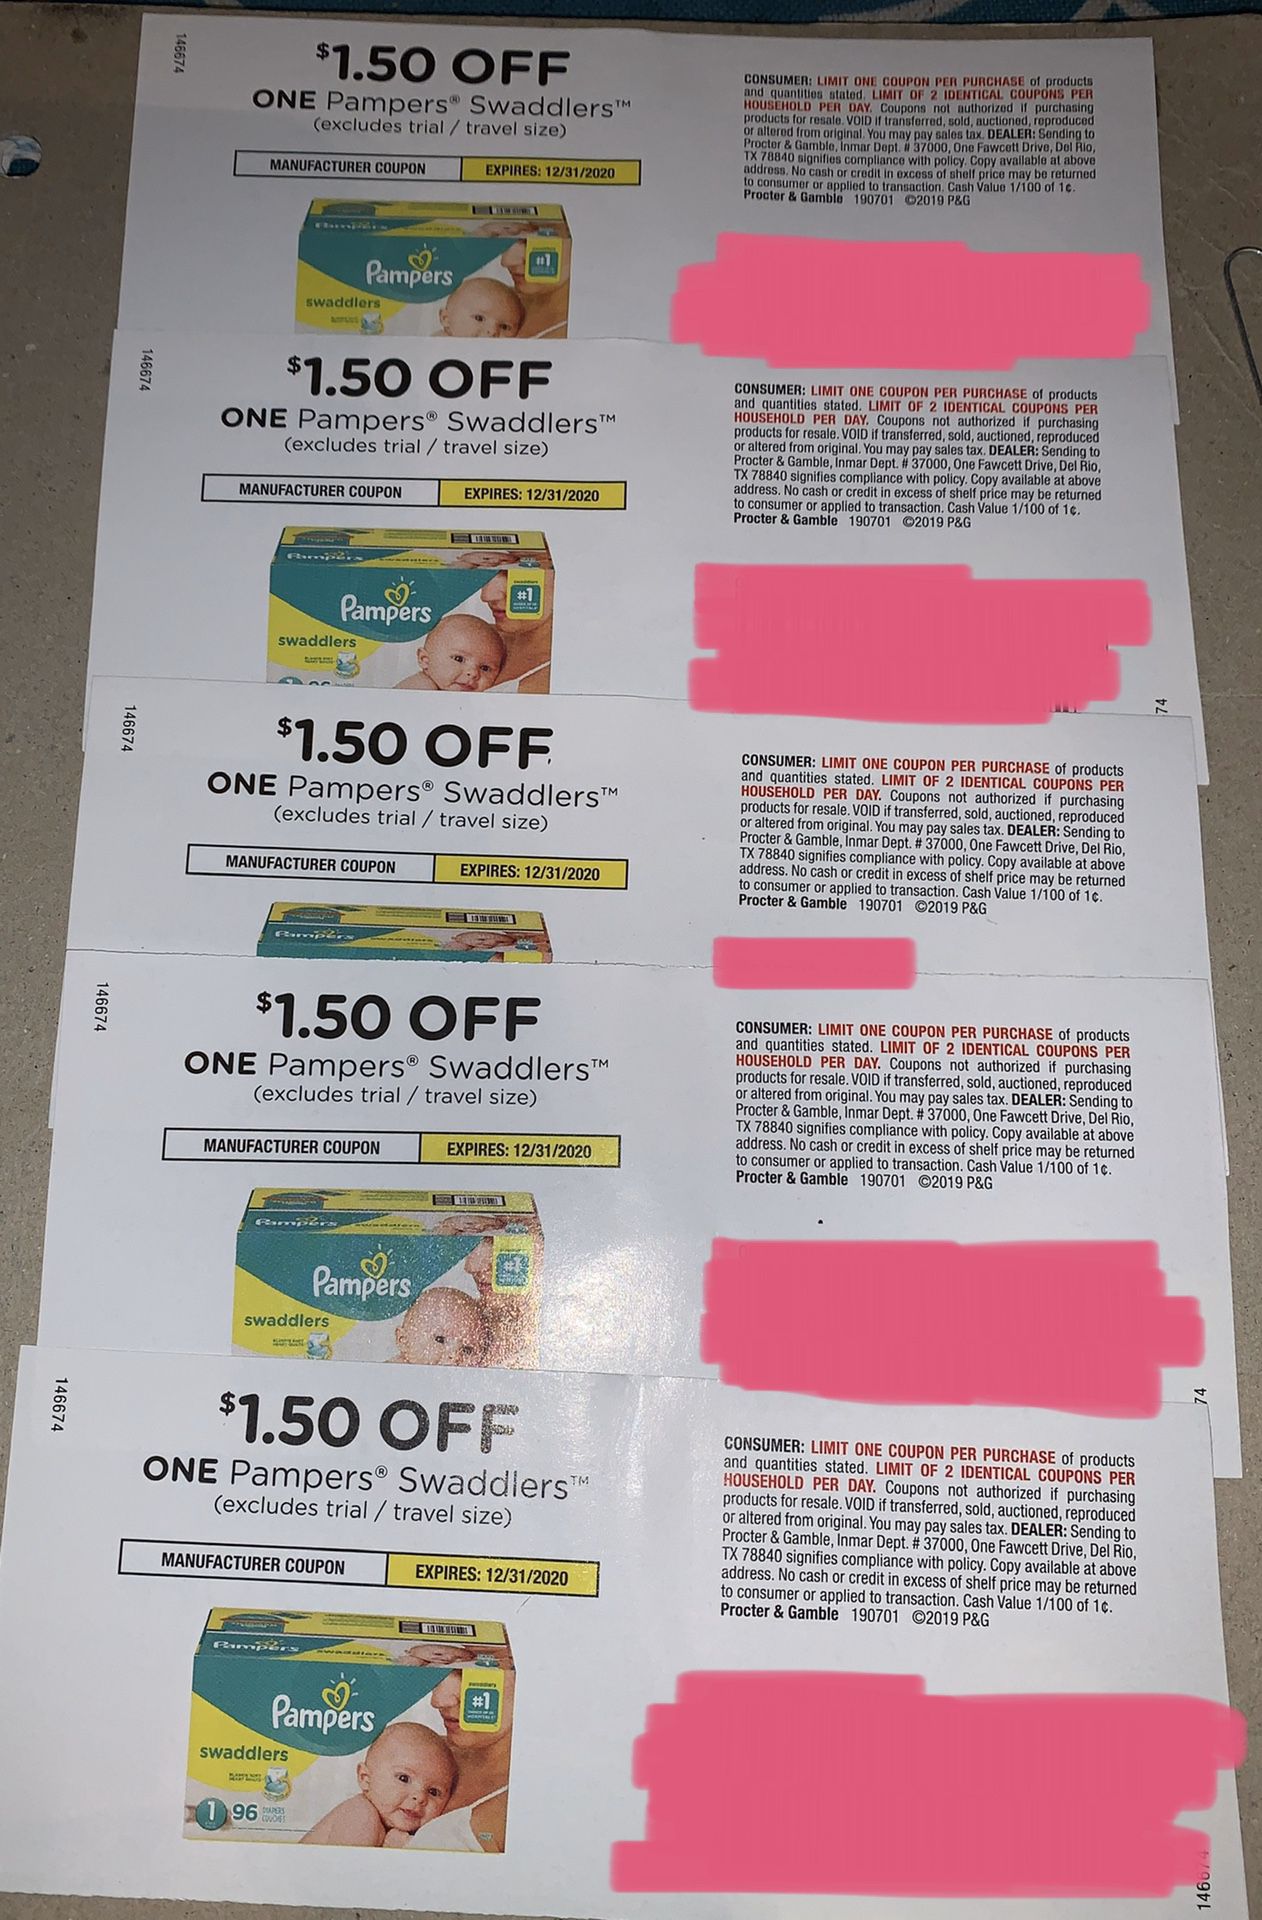 5 Pampers coupons: $1.50 off Pampers Swaddlers diapers, expires 12/31/20